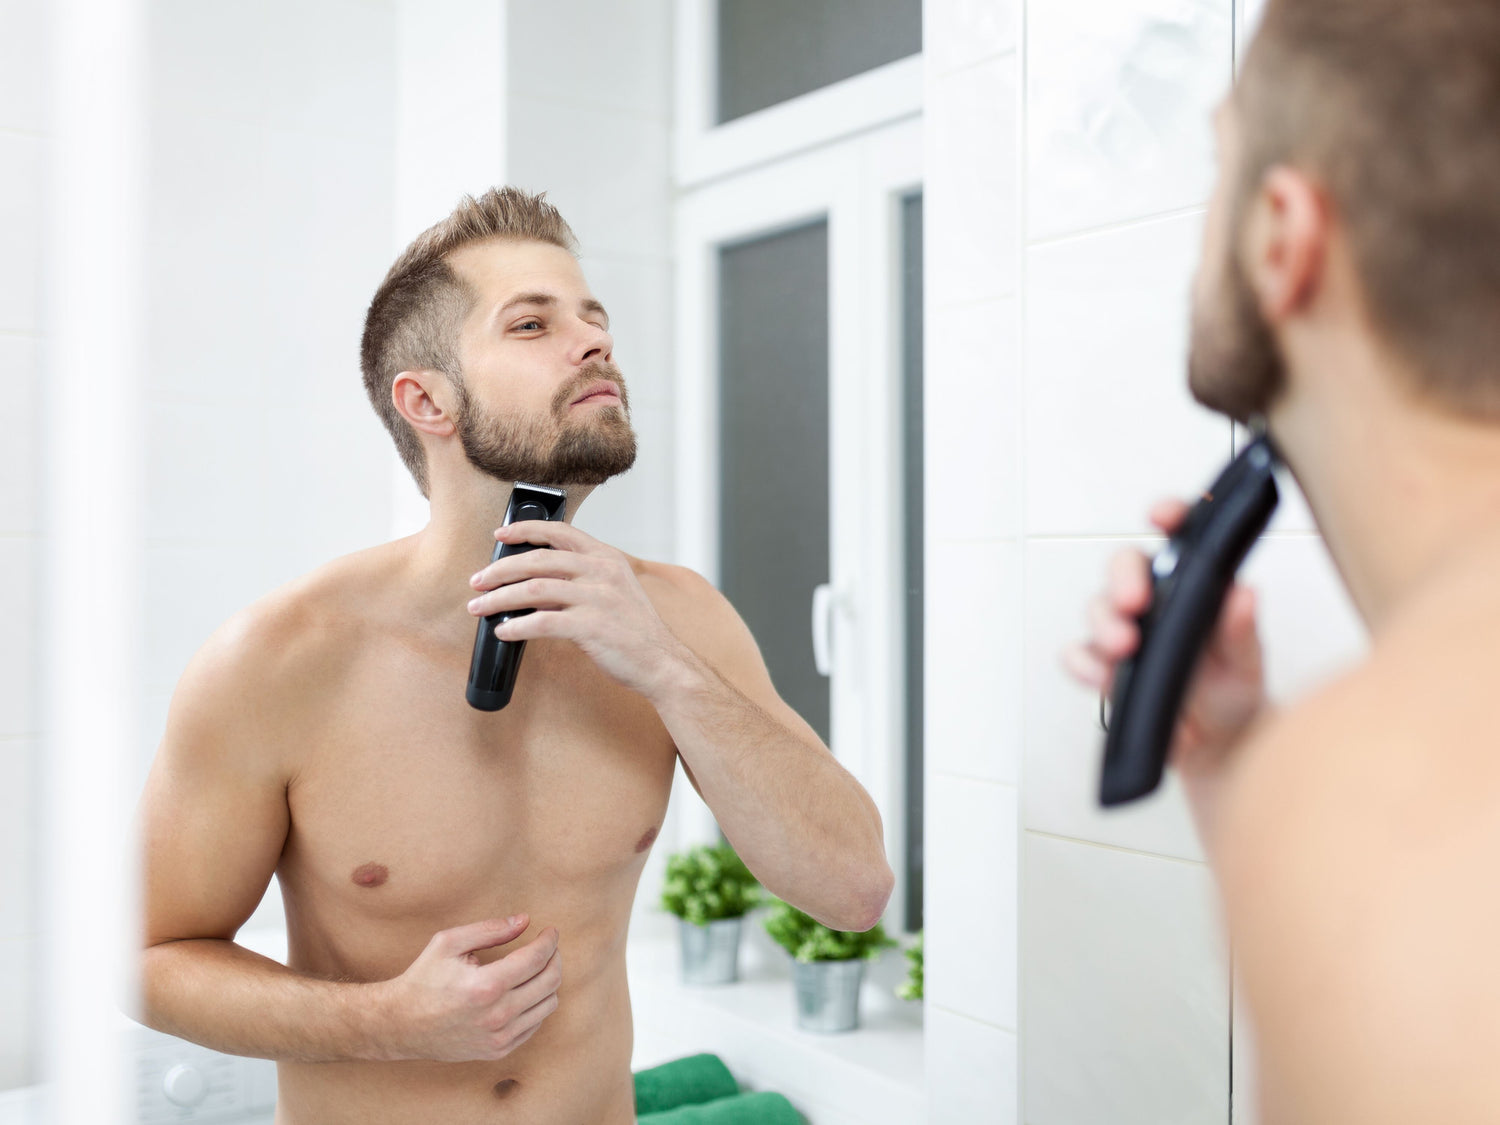 Trimmer Vs. Shaver: What's the difference?